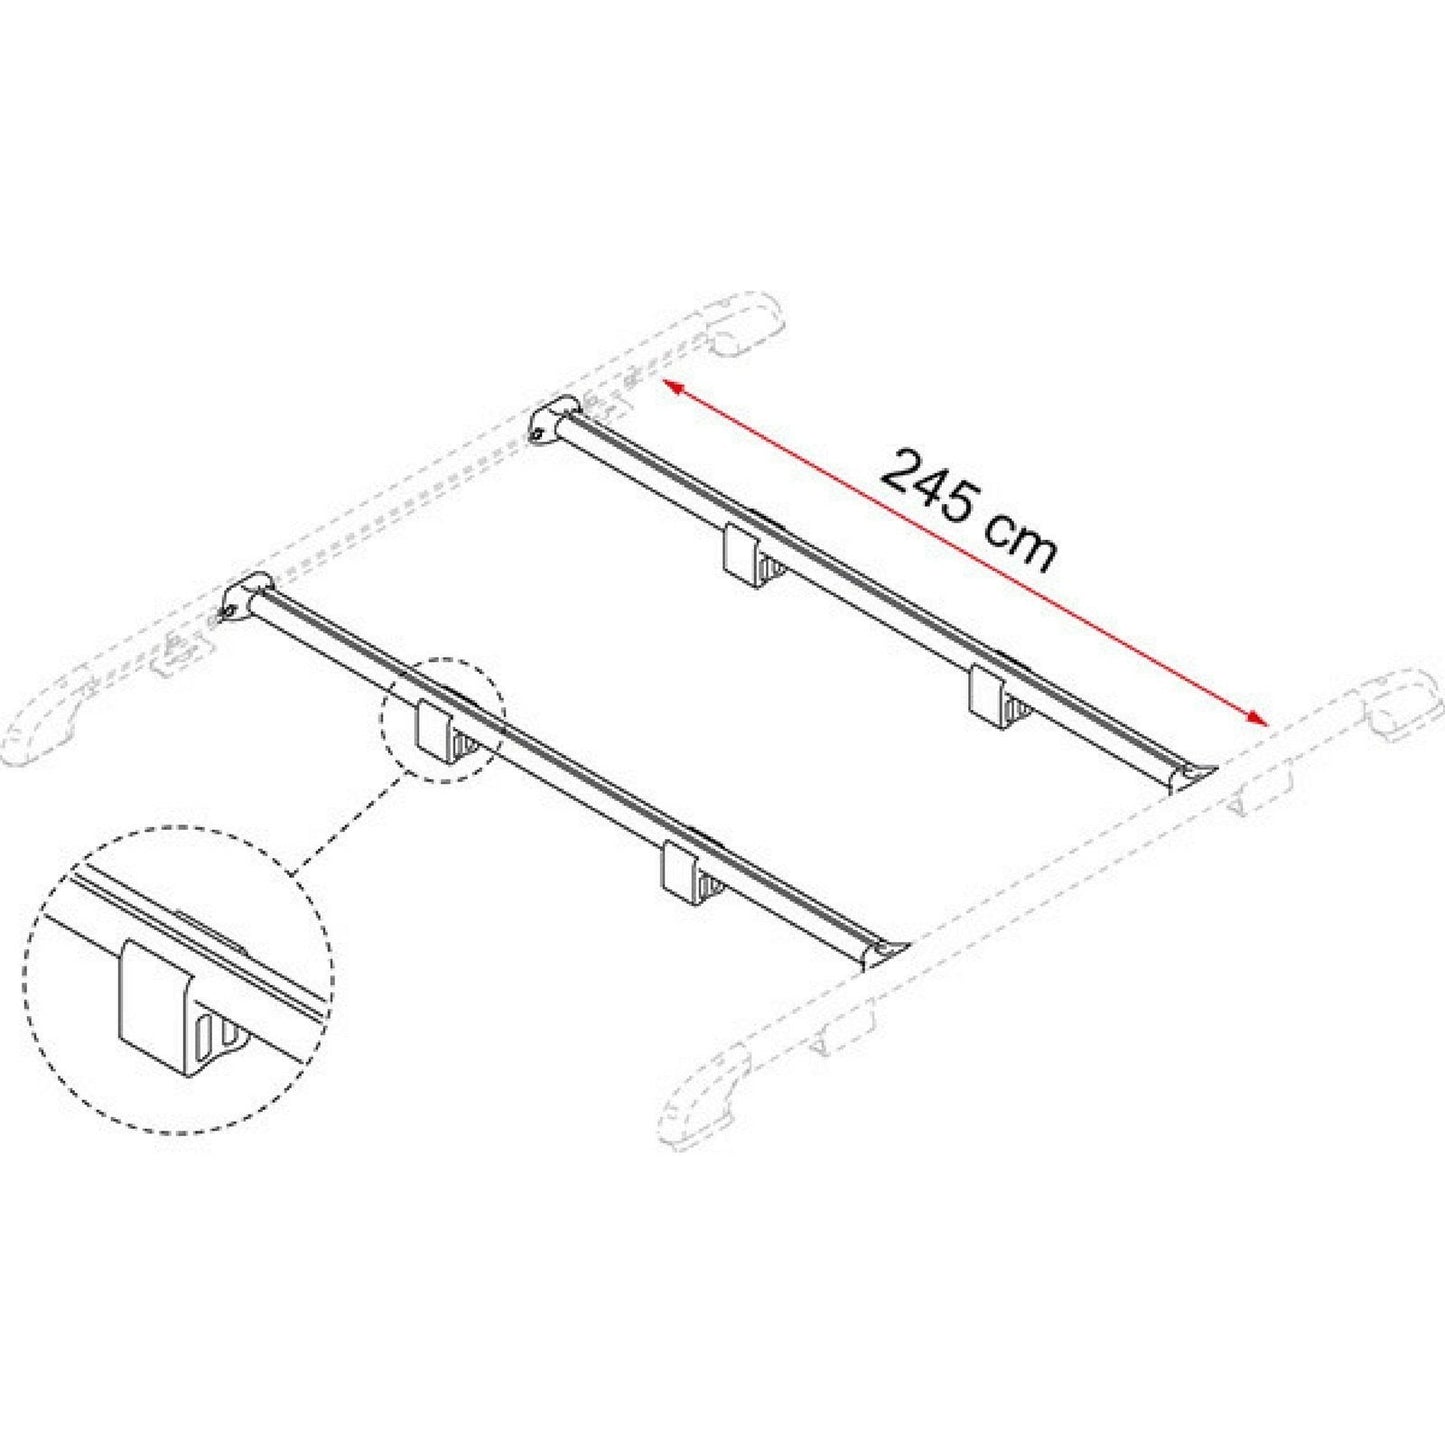 Fiamma Fixing-Bar Roof Rail made by Fiamma. A Accessories sold by Quality Caravan Awnings